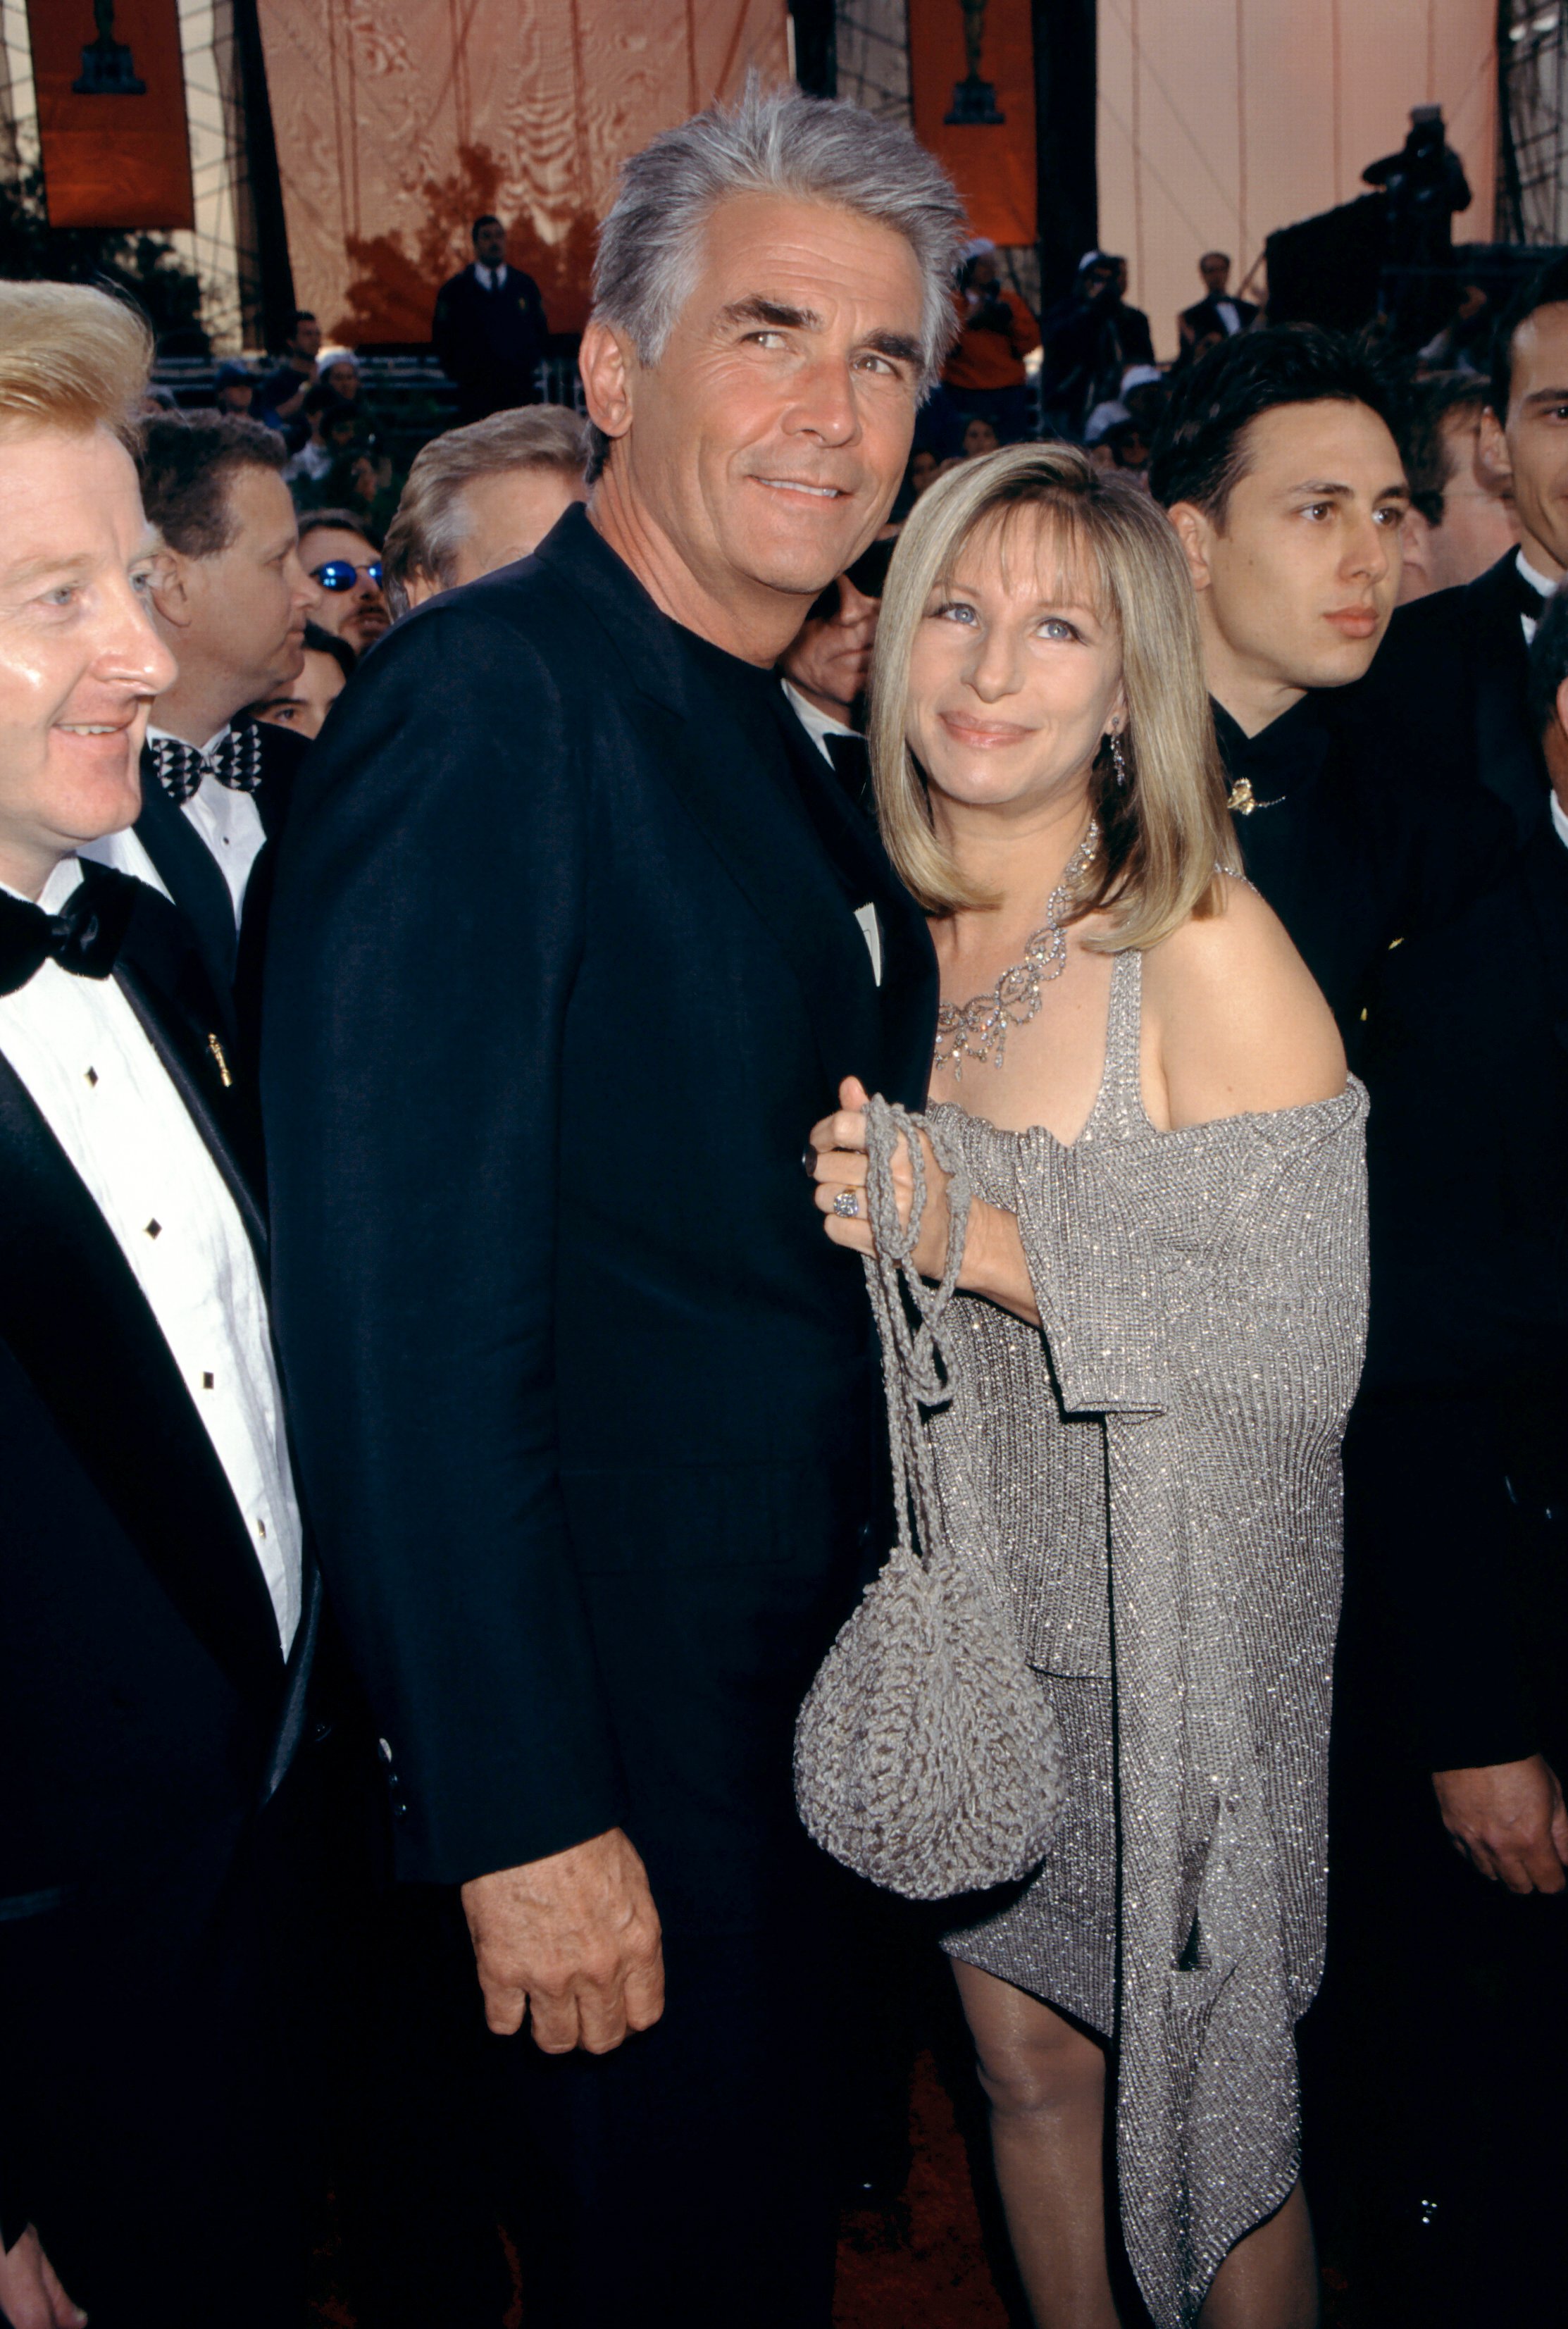  Actor James Brolin and girlfriend singer Barbra Streisand attend The 69th Annual Academy Awards ceremony at the Shrine Auditorium on March 24, 1997 in Los Angeles, California ┃Source: Getty Images